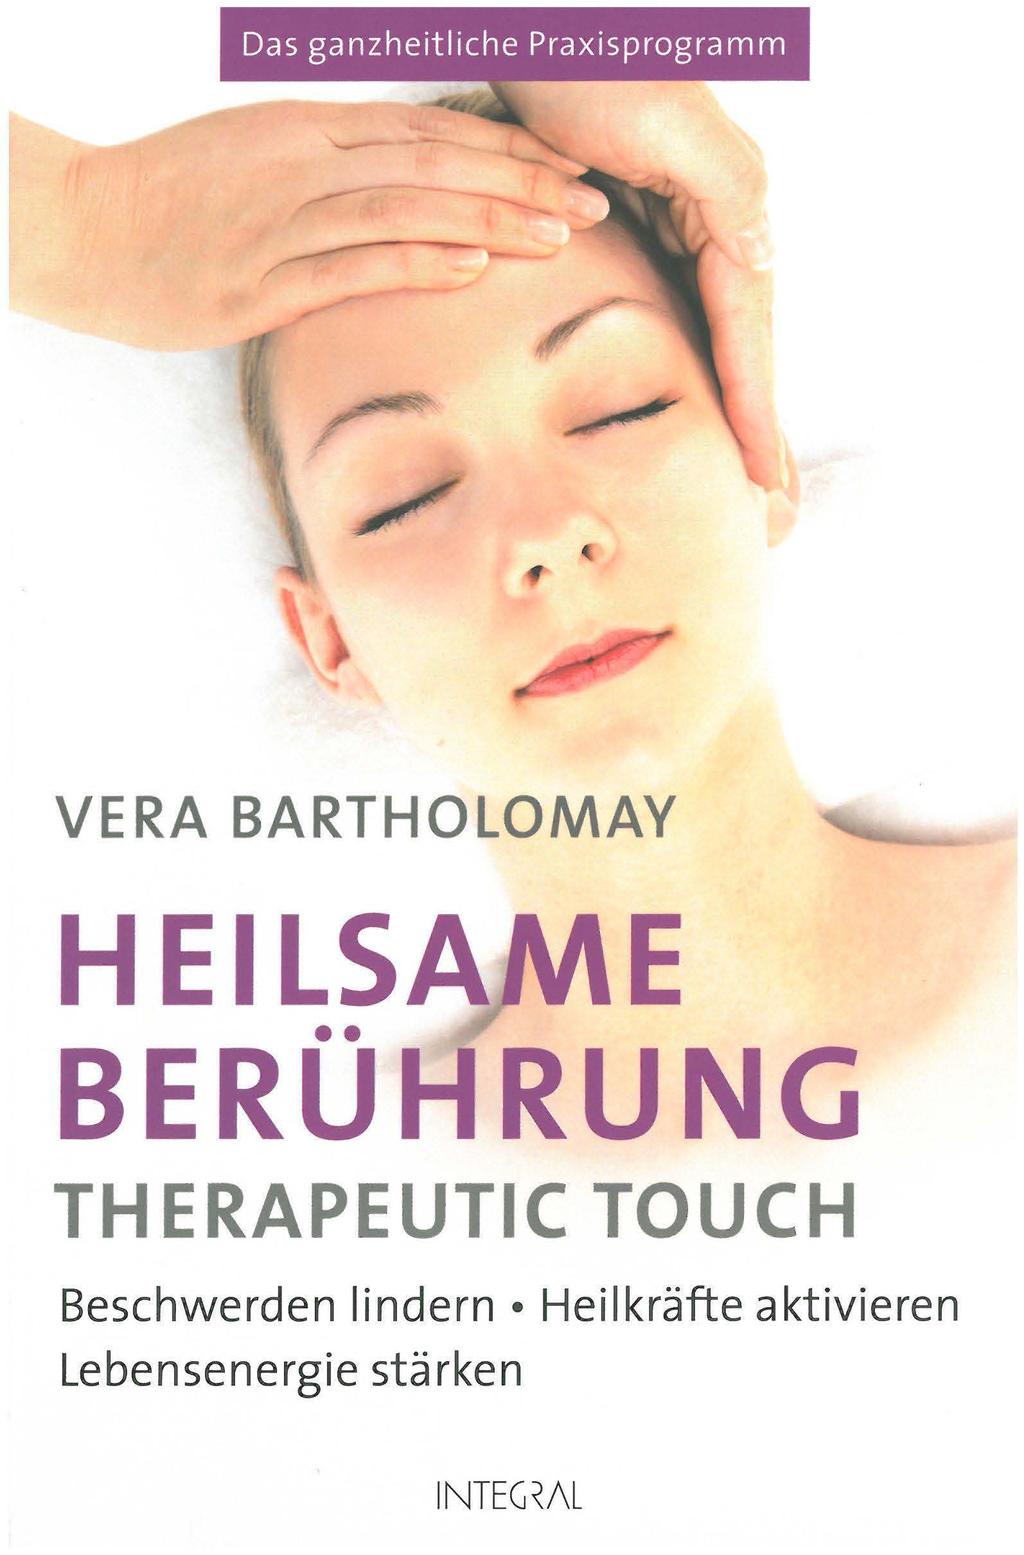 VERA BARTHOLOMAY HEILSAME BERUHRUNG THERAPEUTIC TOUCH